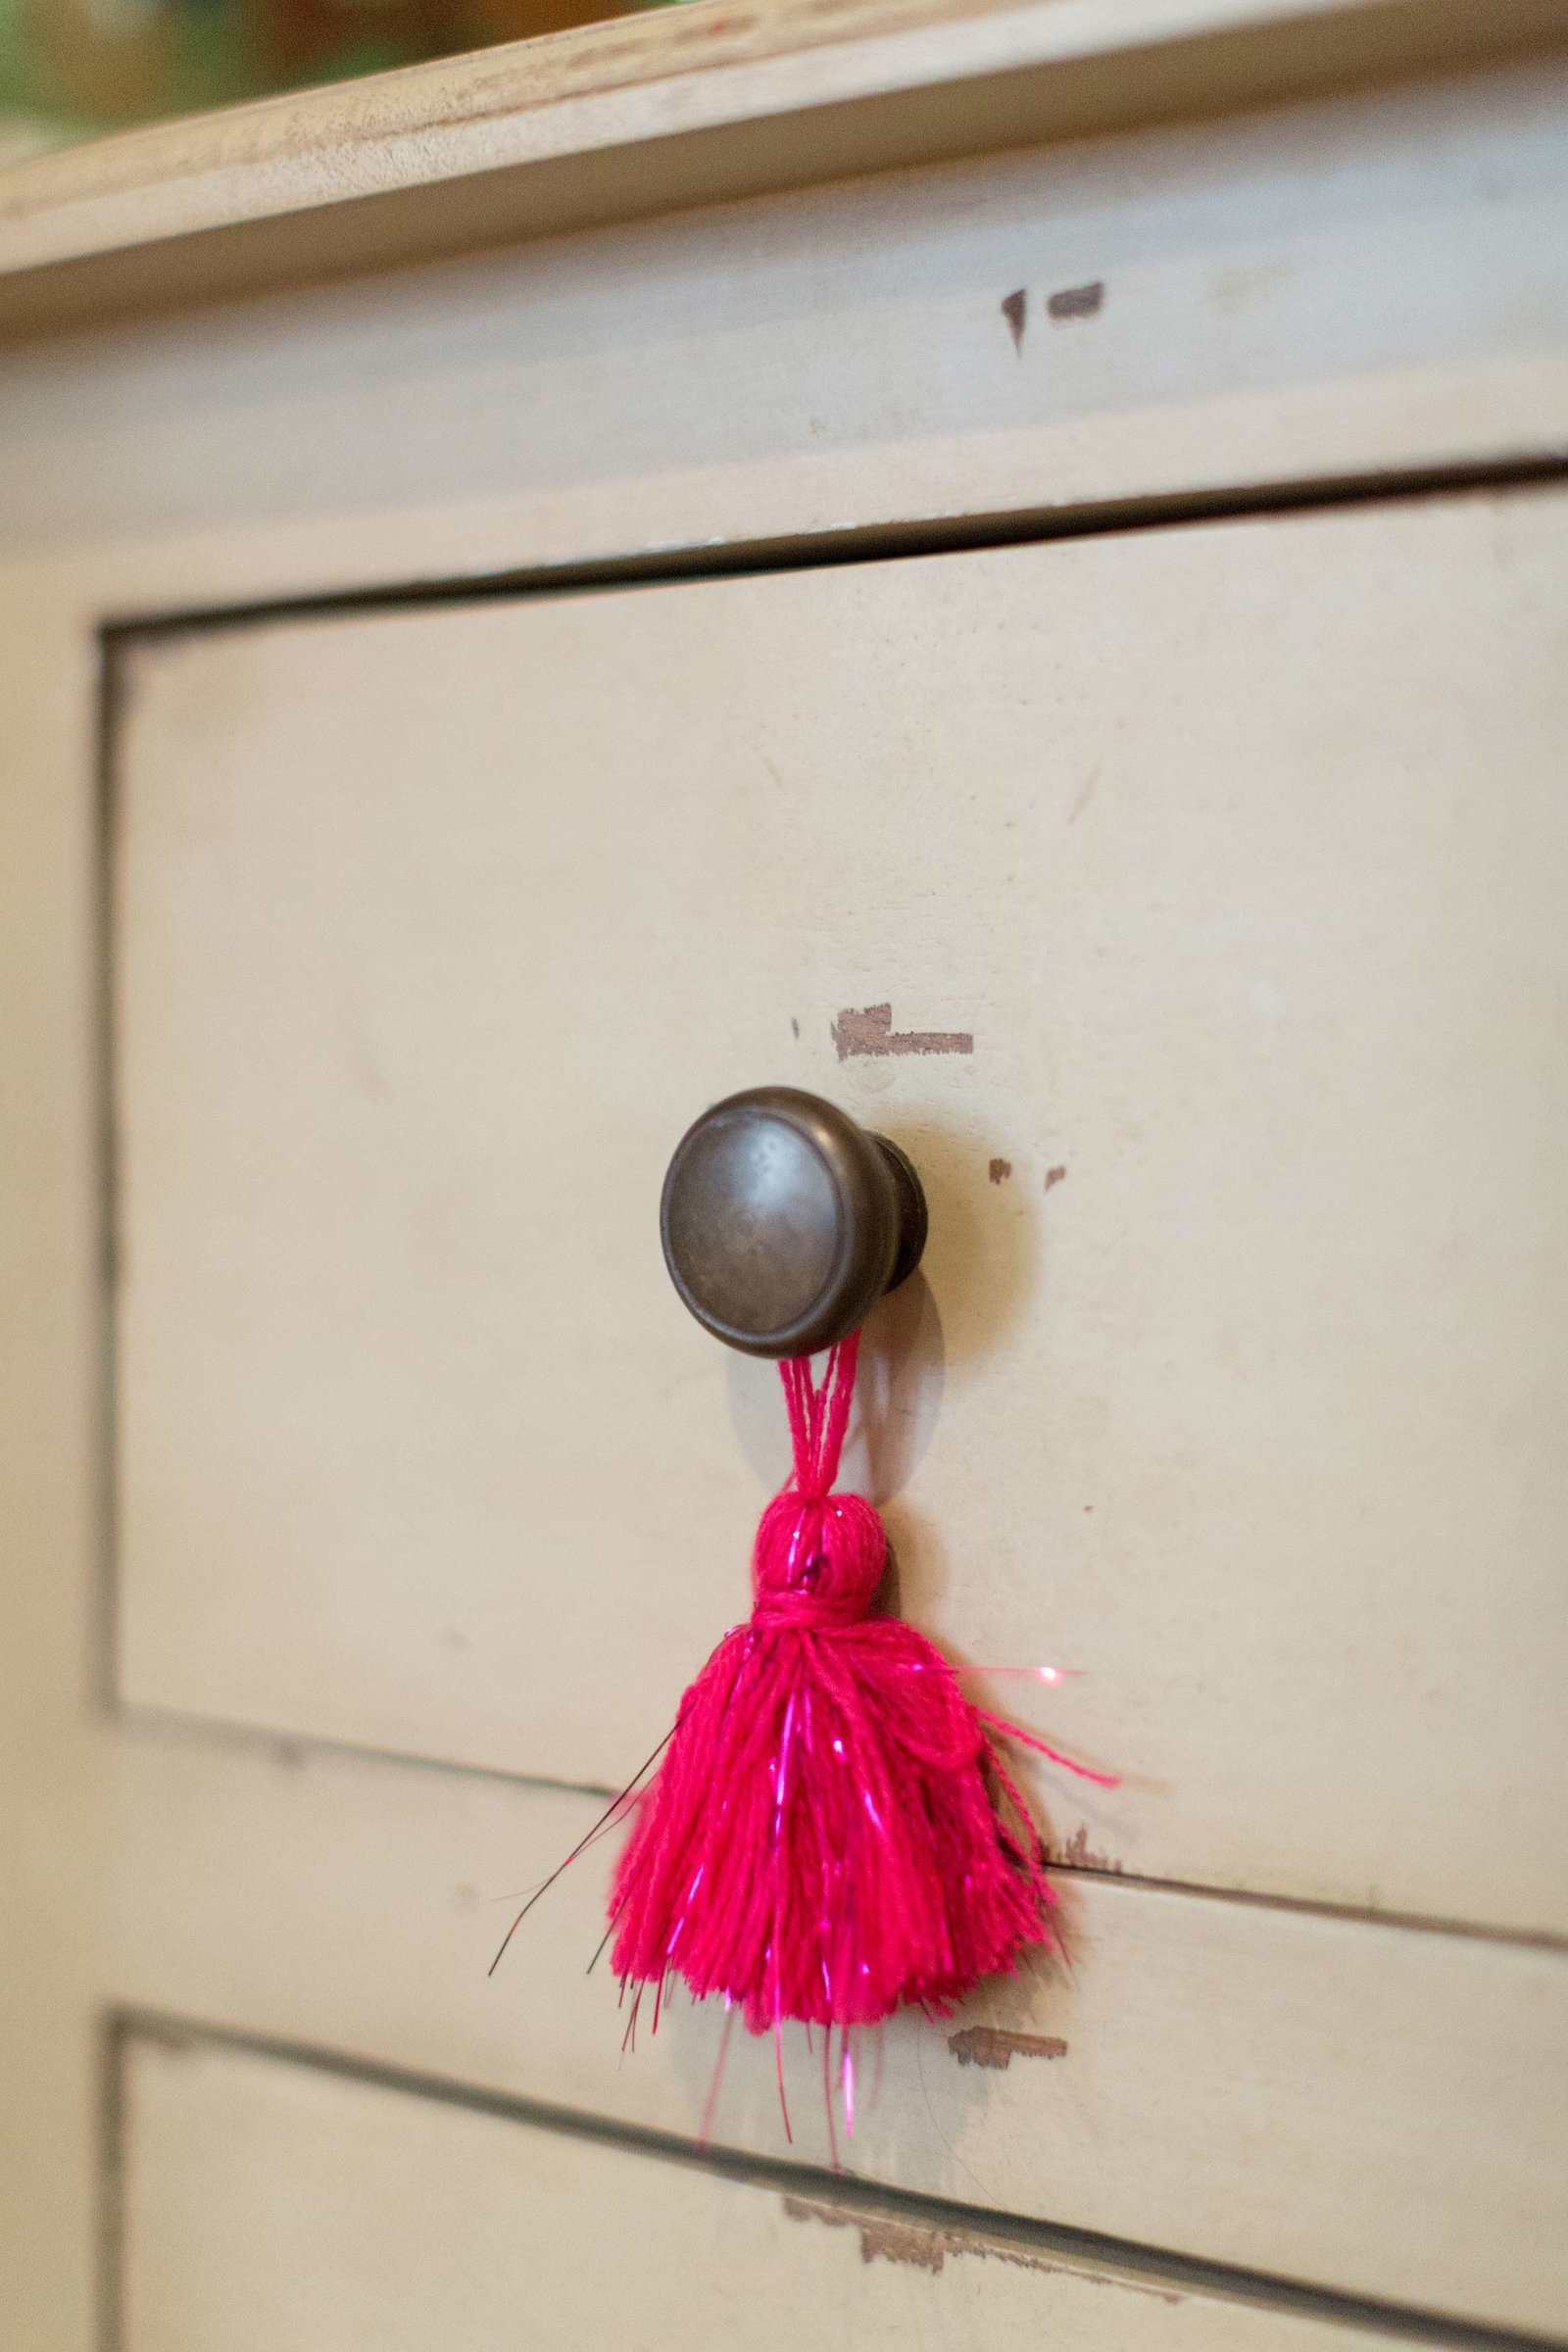 A drawer pull with hanging hot pink tassels.